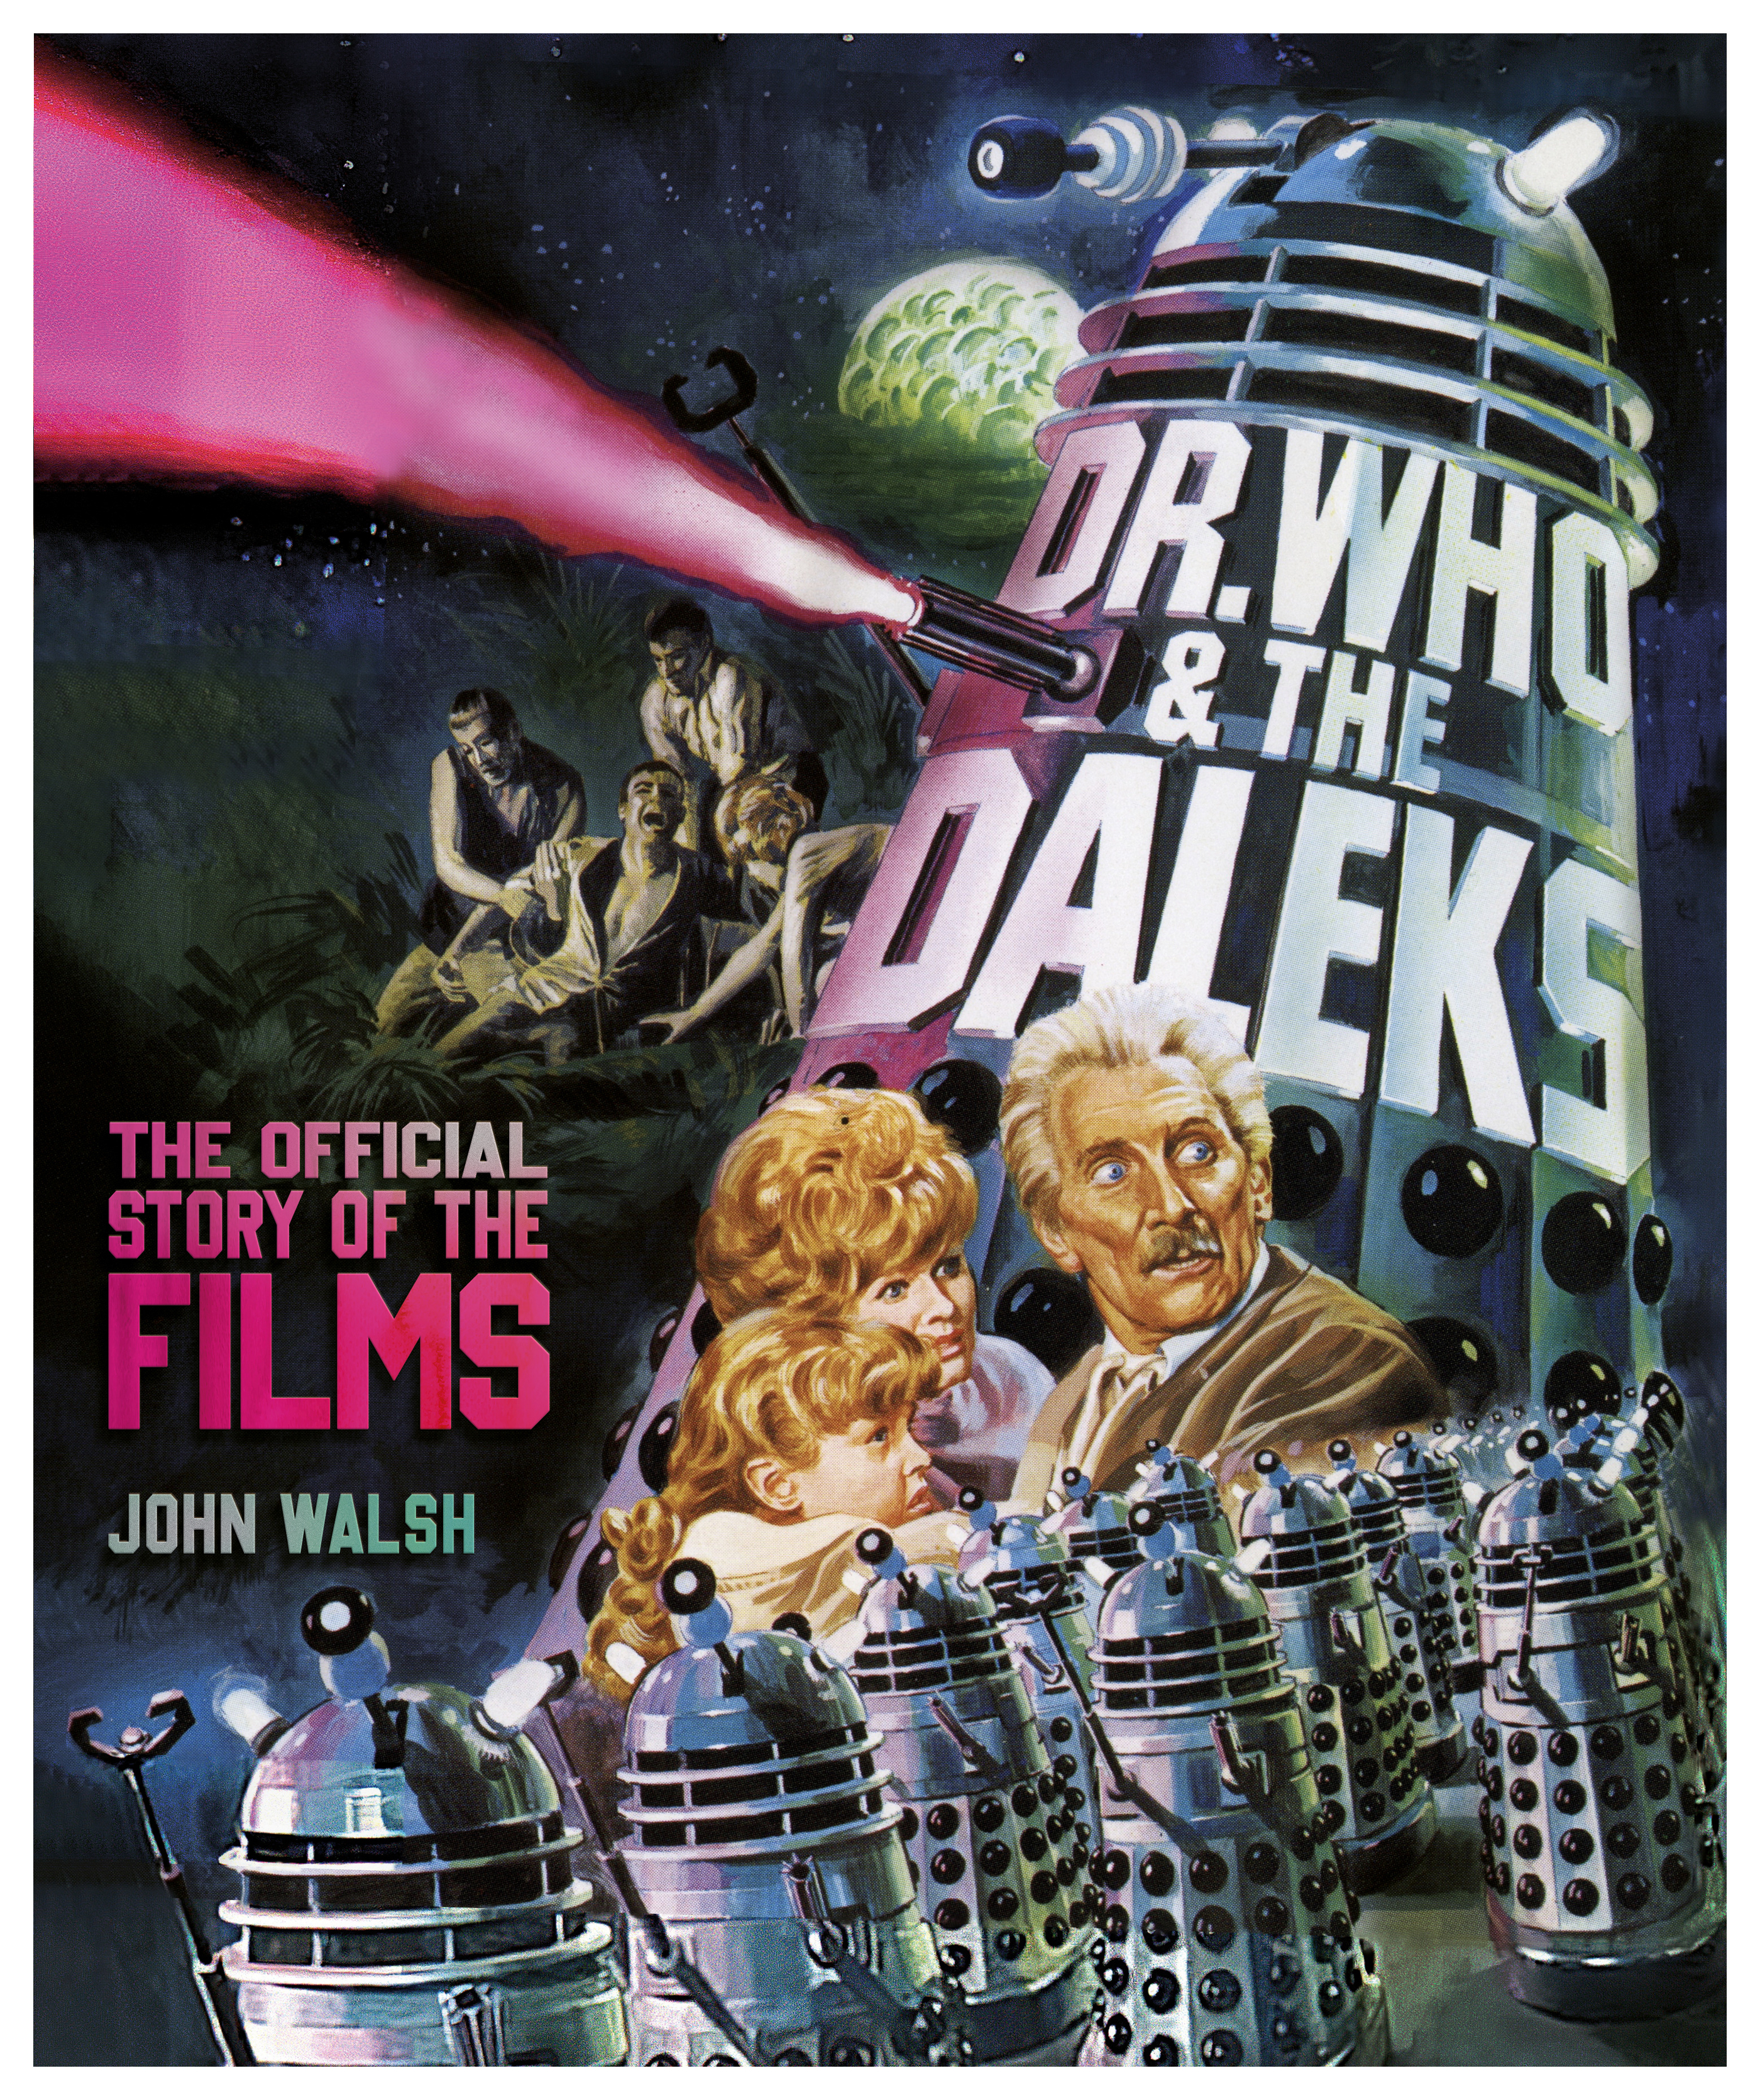 Docr Who & The Daleks Official Story of Films Hardcover